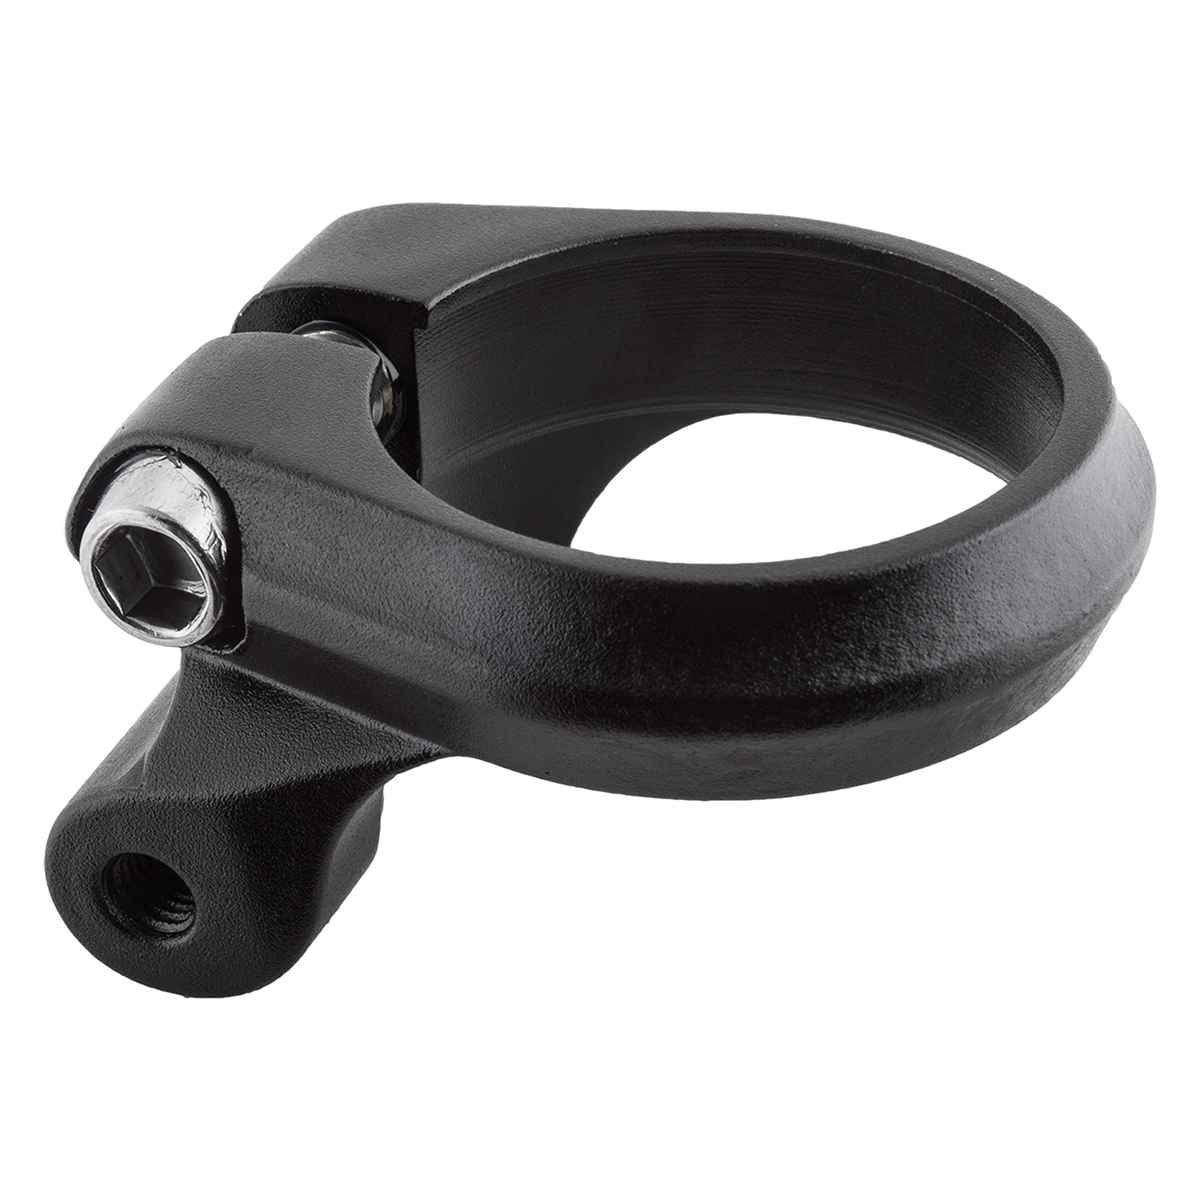 Sunlite Alloy Seat Post Clamp with Rack Mount - 34.9mm